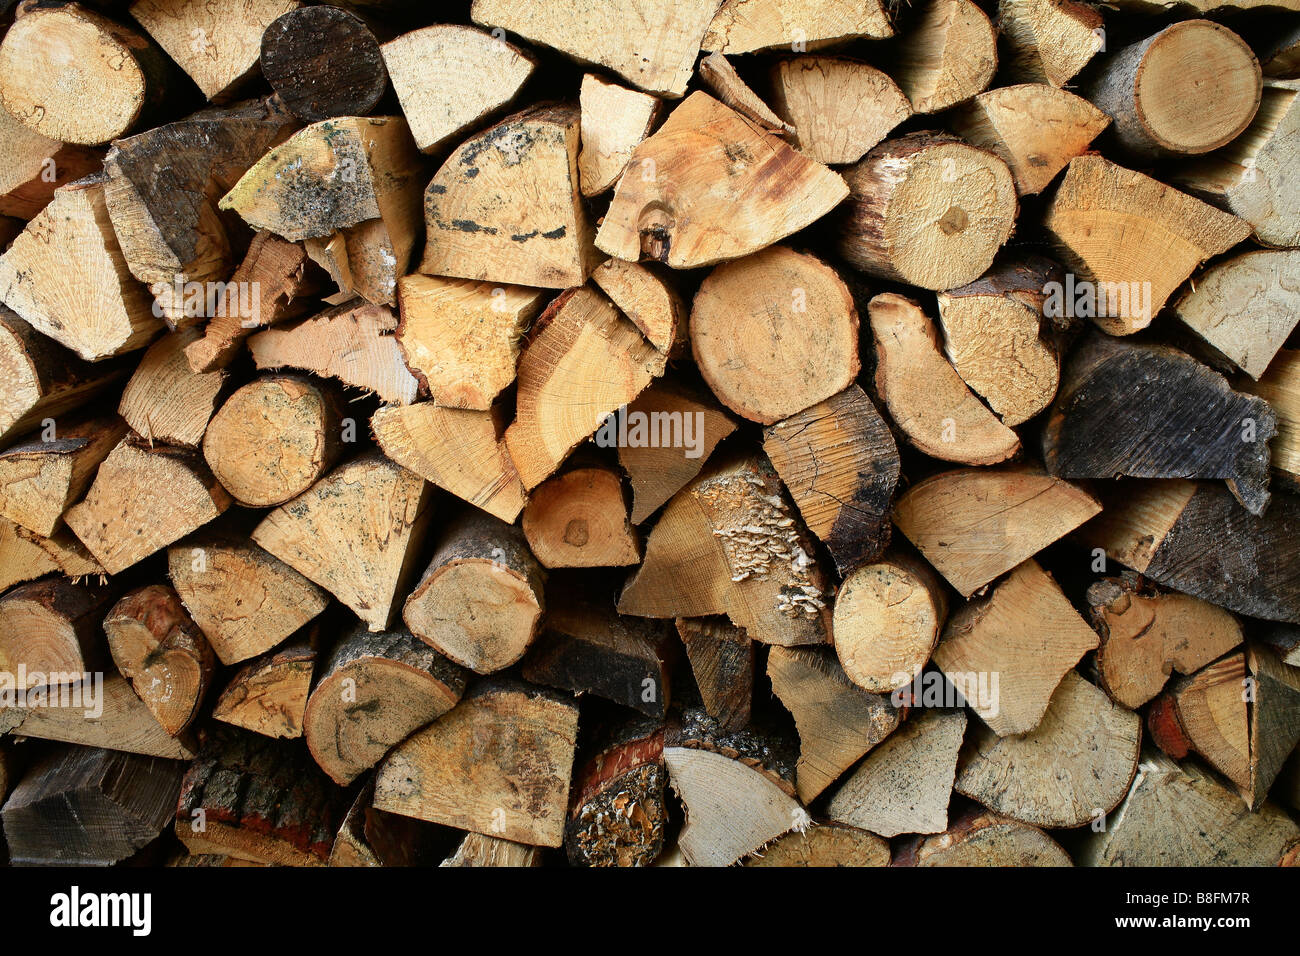 A view of a stack of firewood Stock Photo